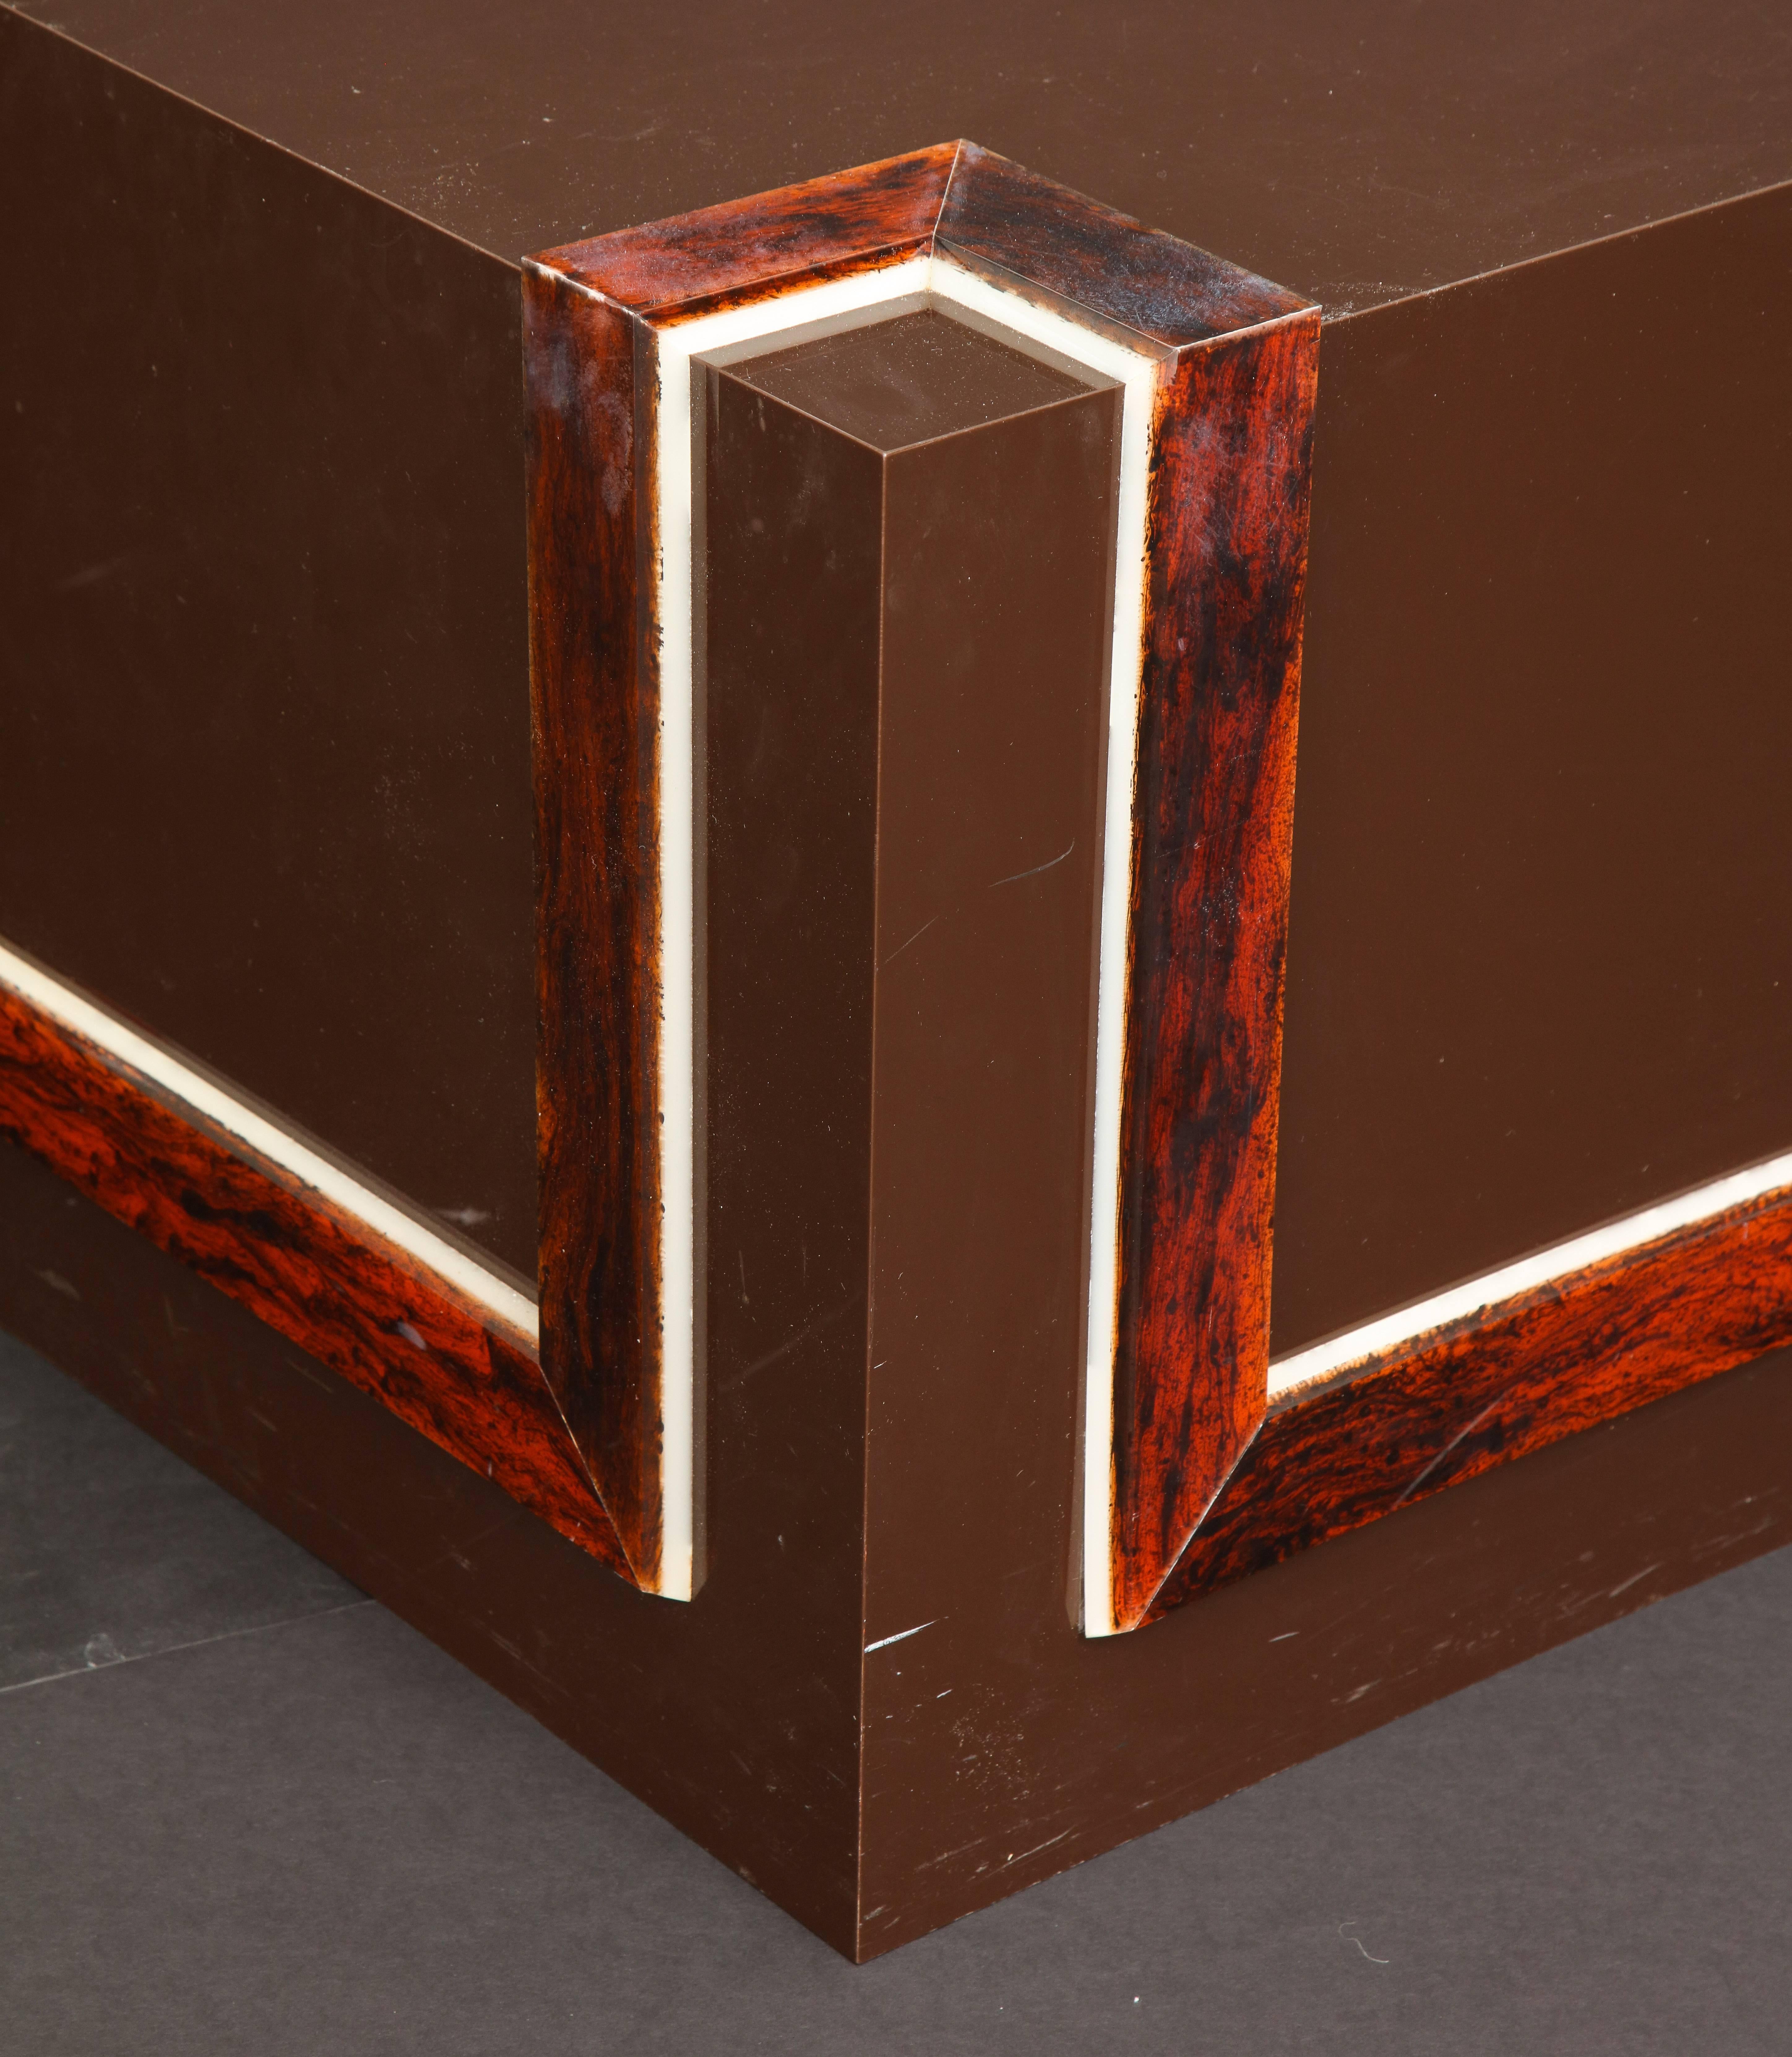 Late 20th Century Modernist Cube Form Cocktail Table with Faux Tortoiseshell Decoration